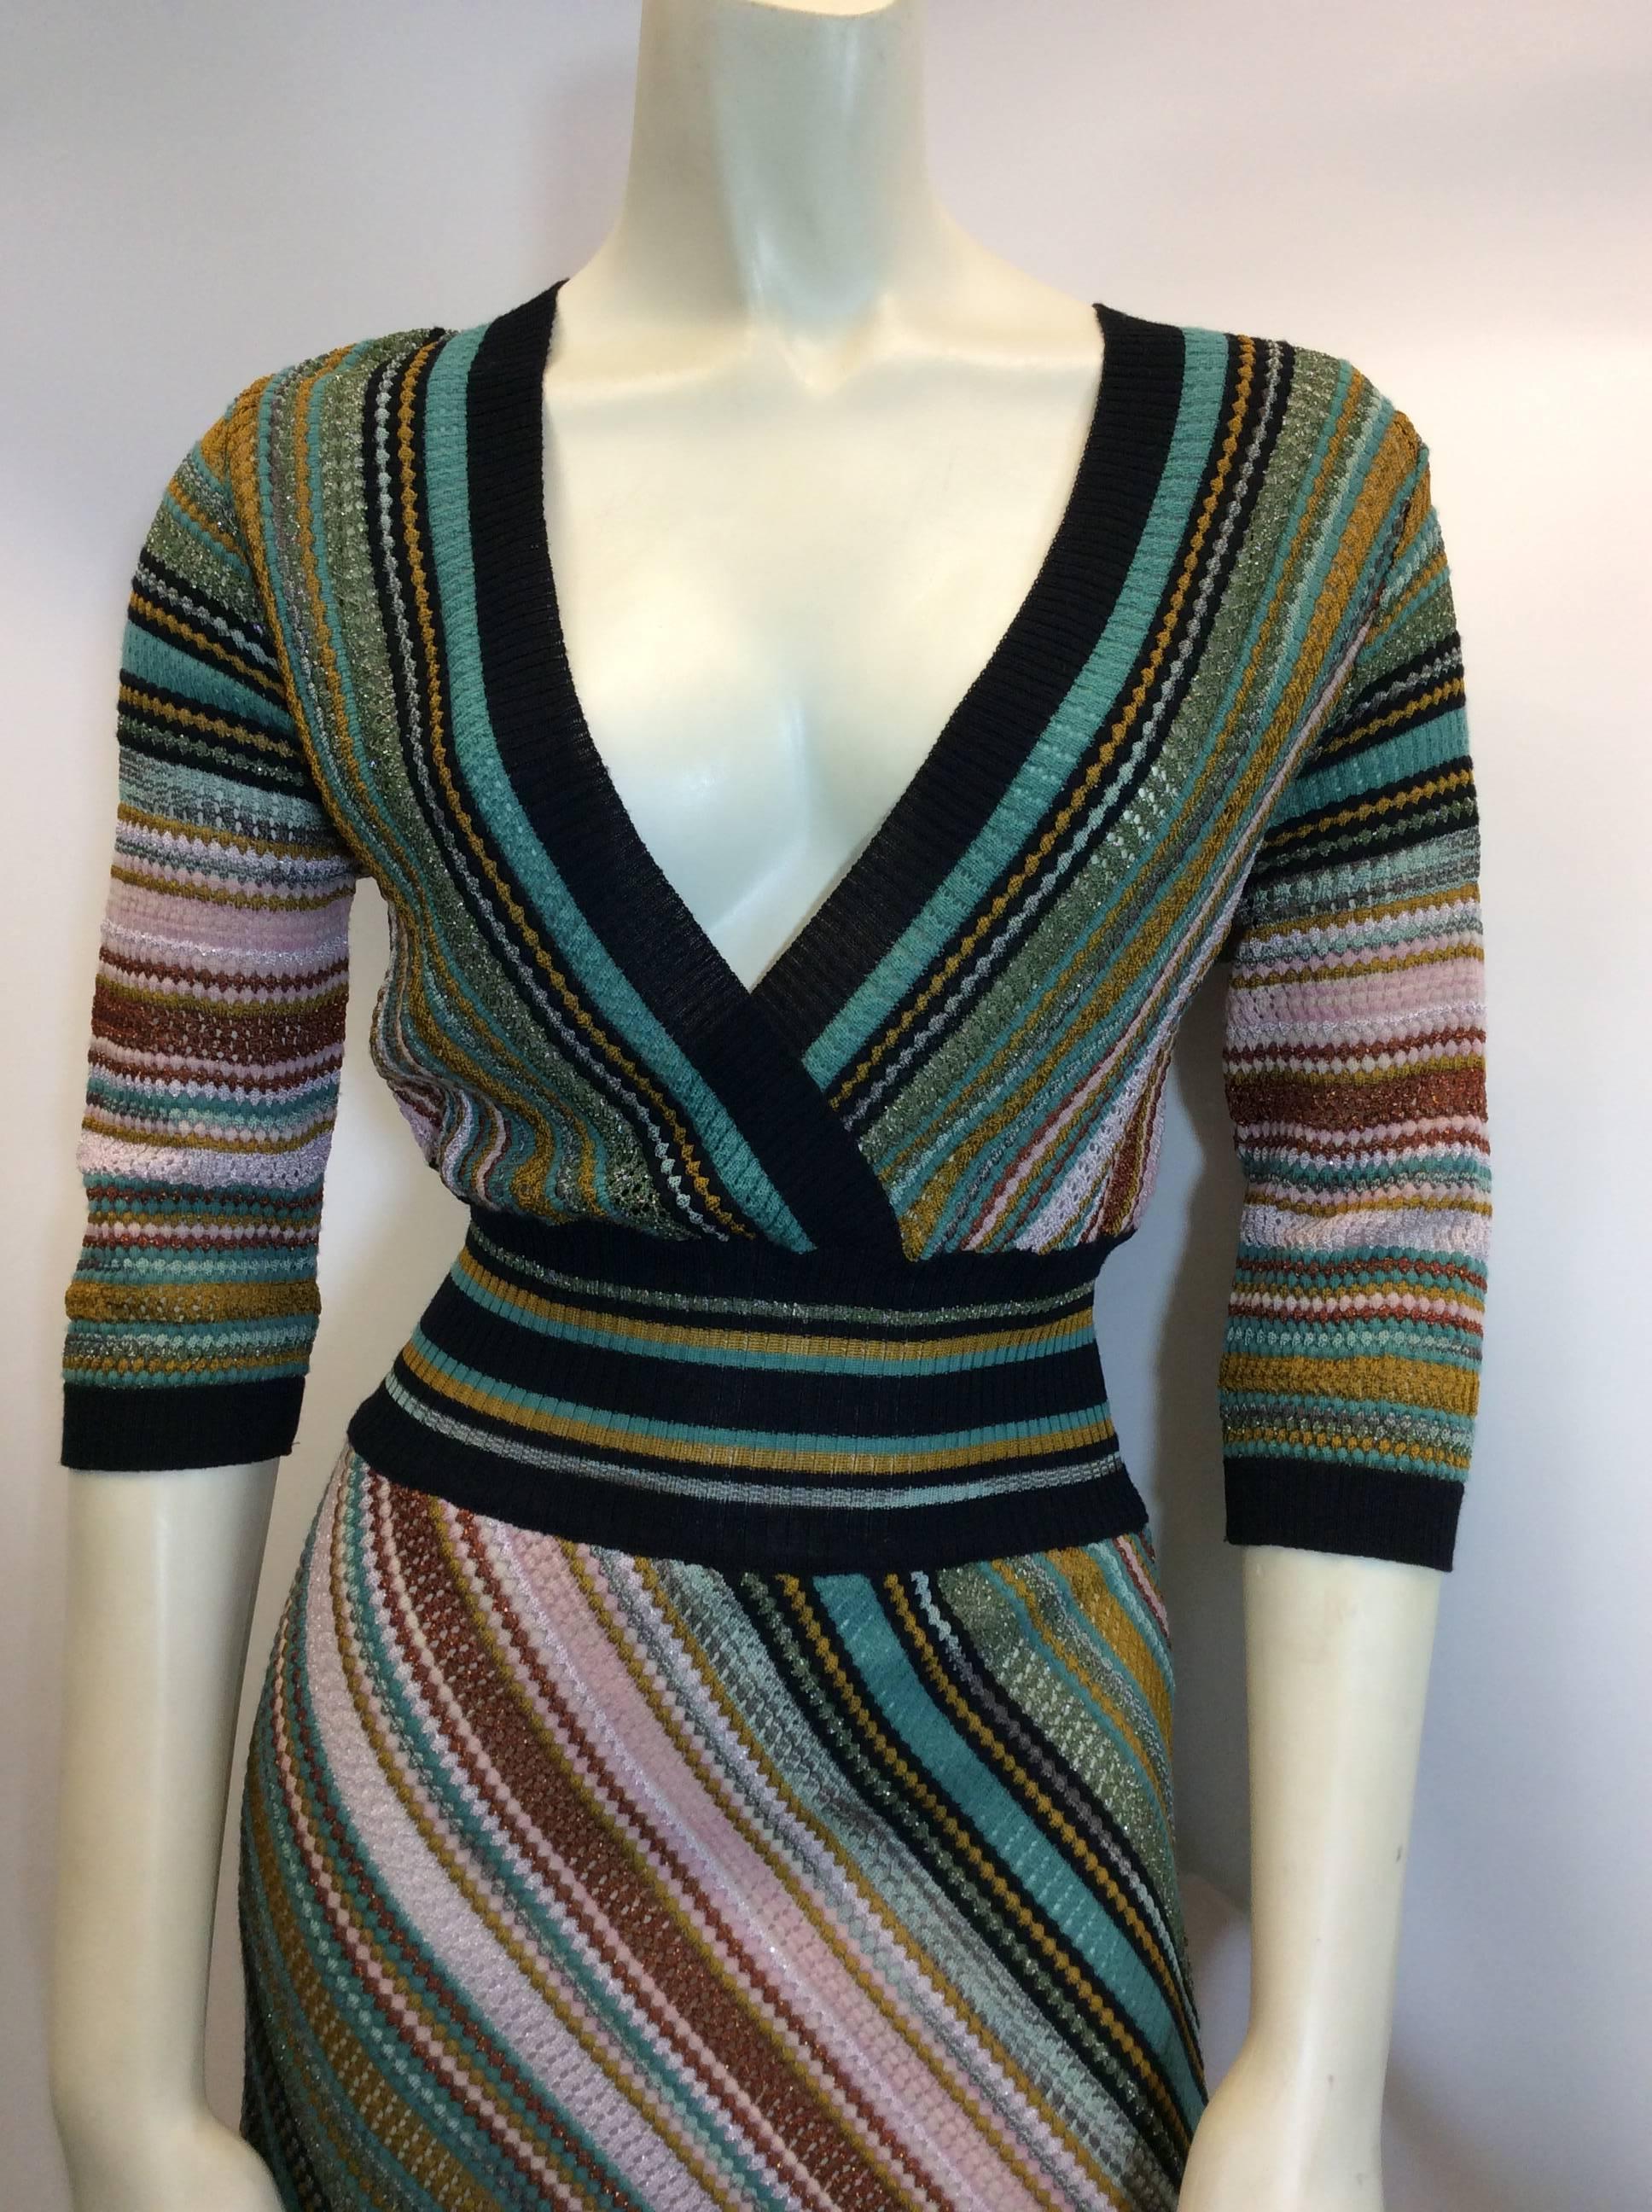 Missoni V Neck Striped Dress
Made in Italy
$250
Skirt portion of dress is fully lined 
100% polyester
Shimmer effect detailing 